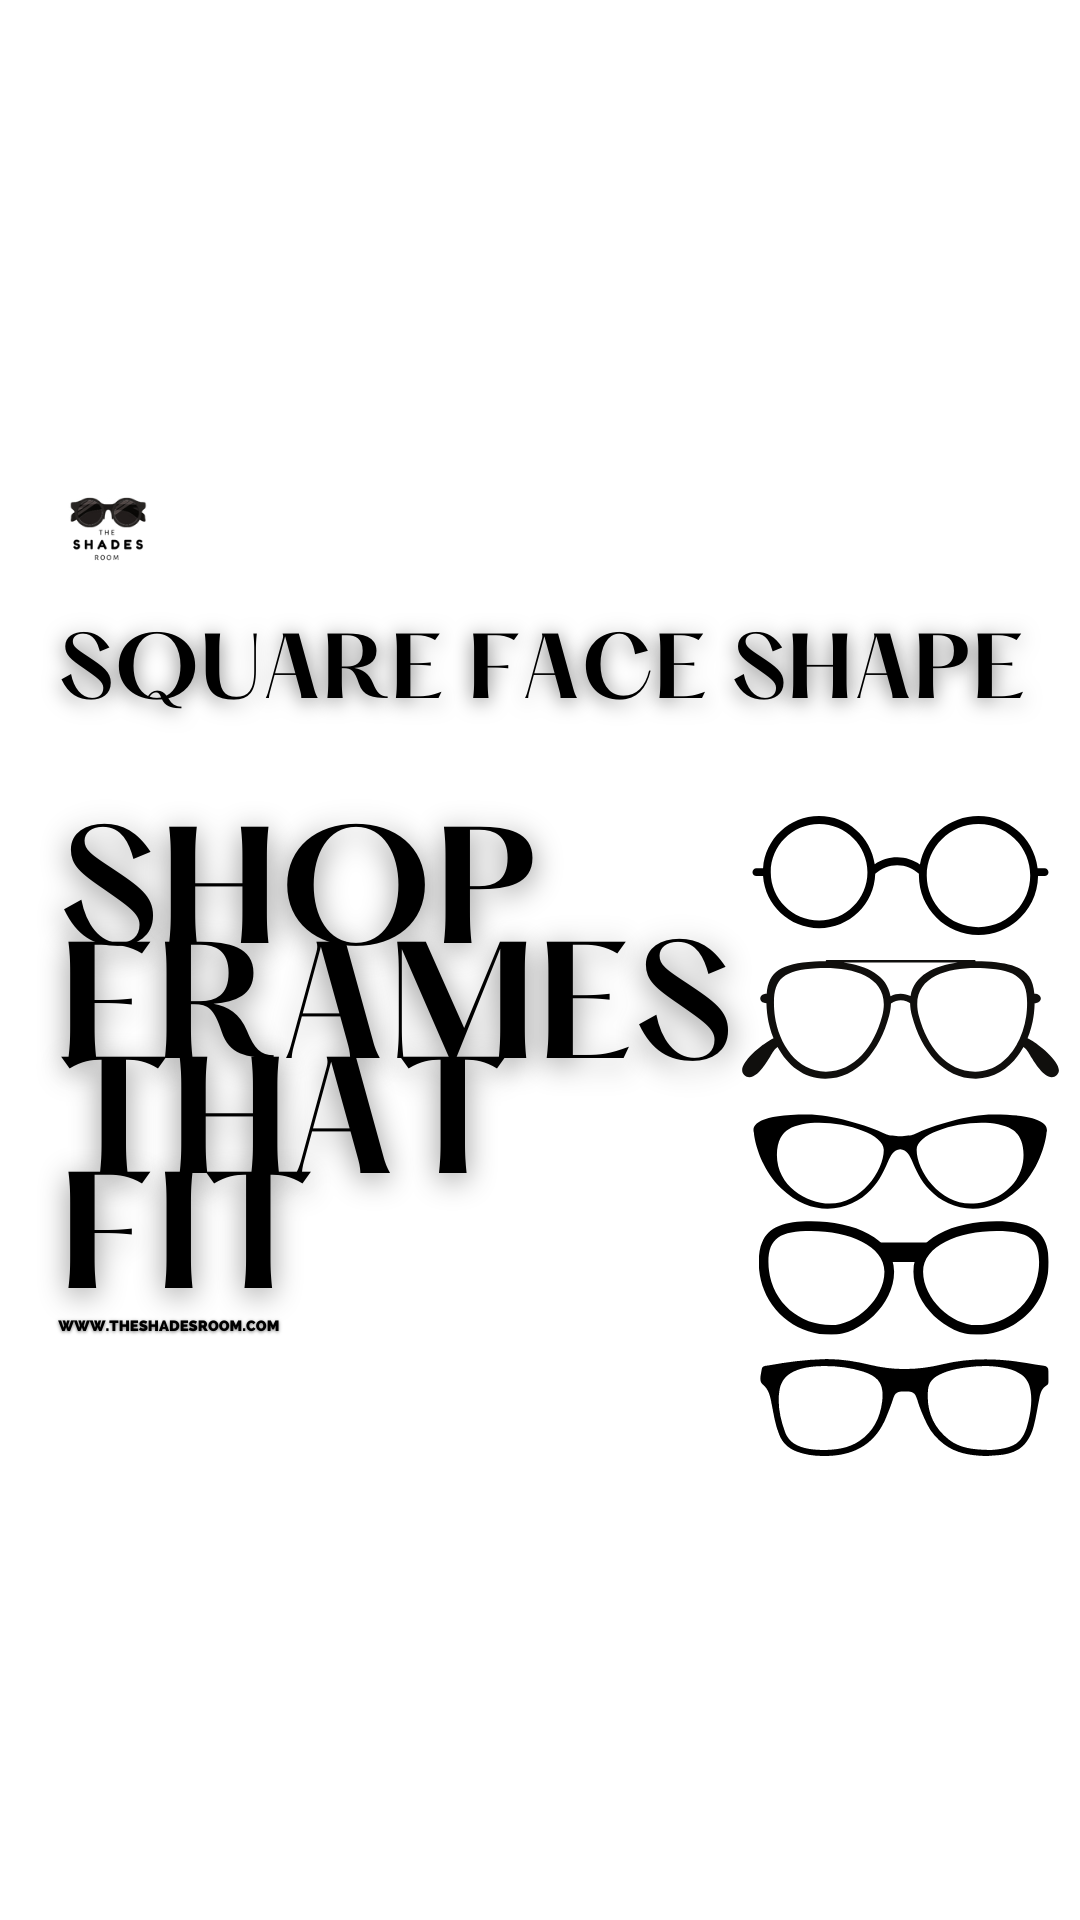 A person with a square face often has proportional features with the widest areas at the forehead & Jawline. Frames That Have Smooth Edges & Accented Corners, Will Flatter Your Face.